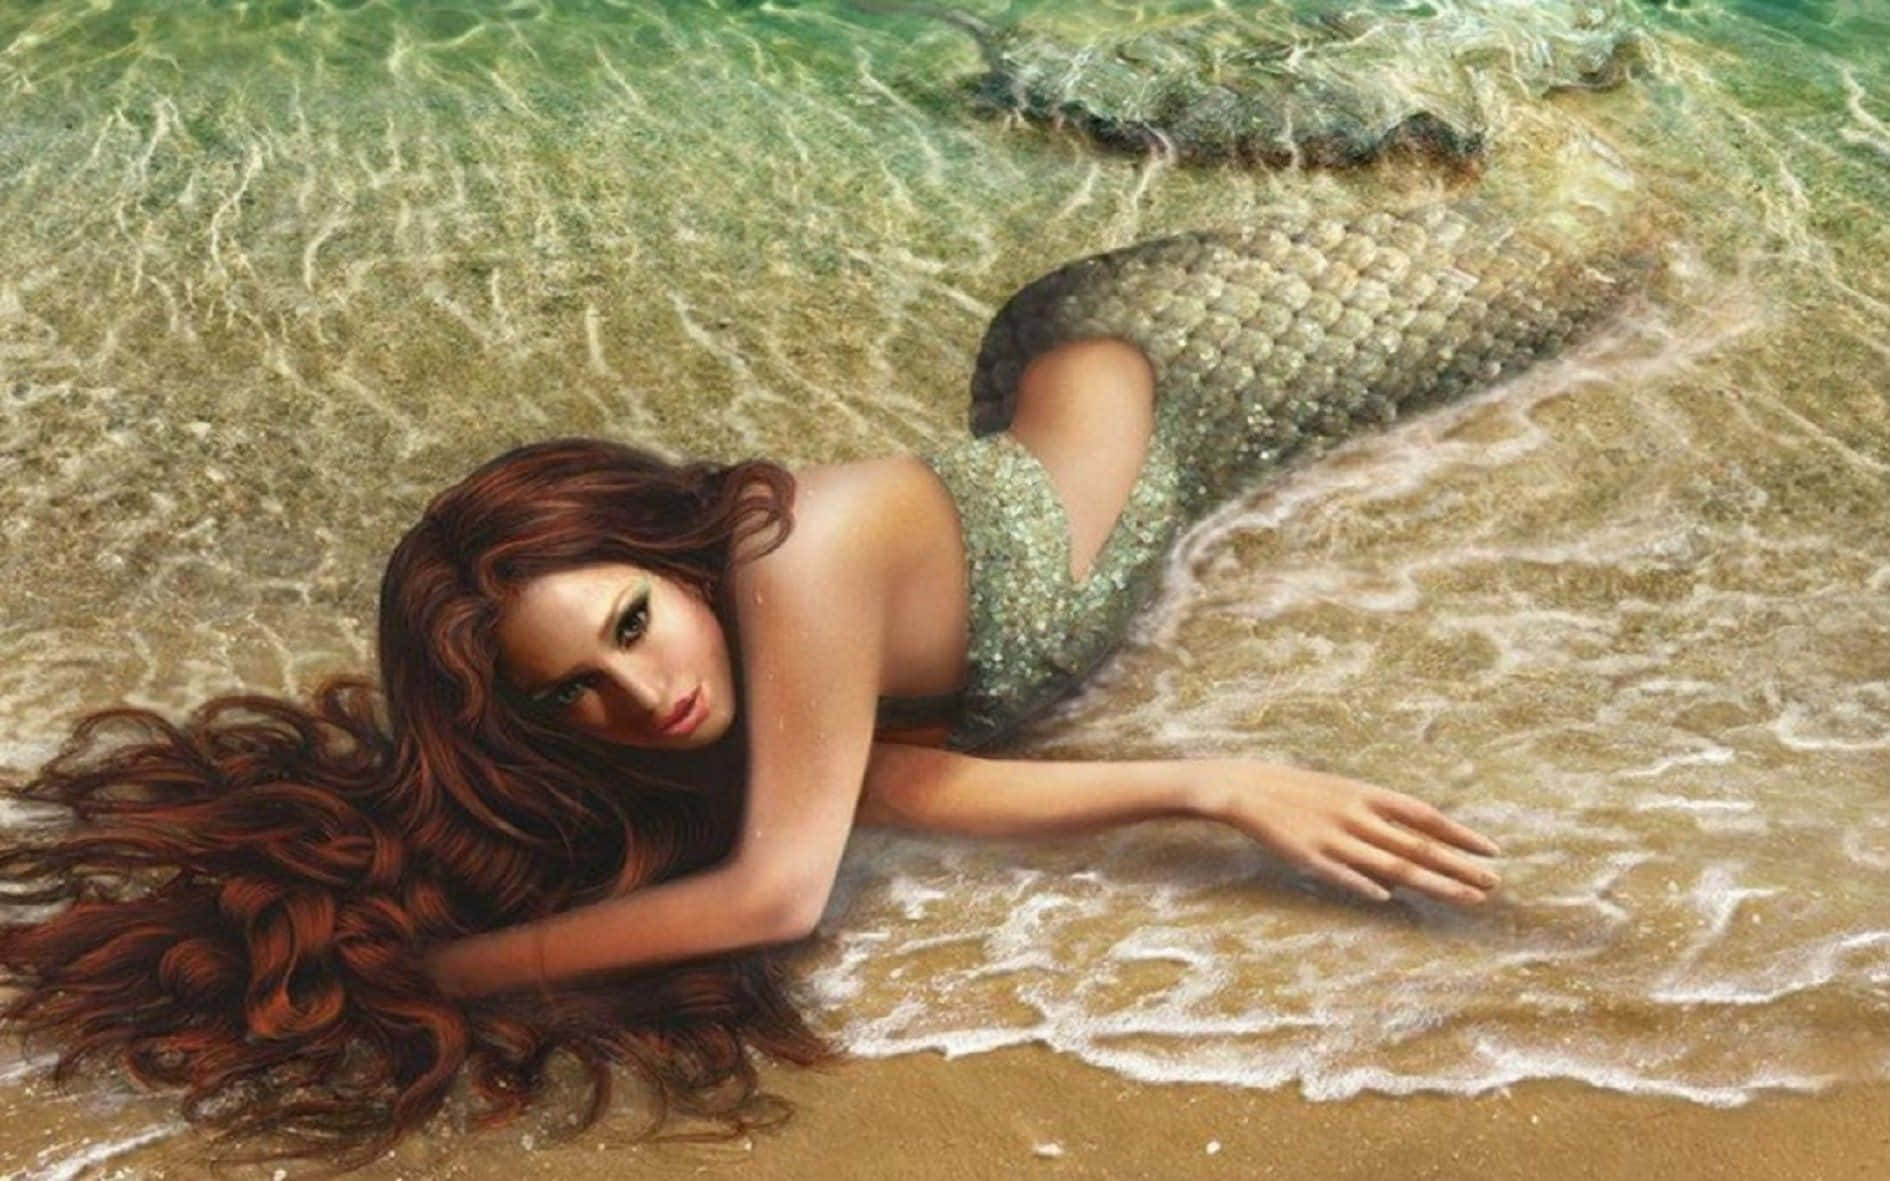 "A beautiful siren of the sea, the mermaid knows no bounds." Wallpaper